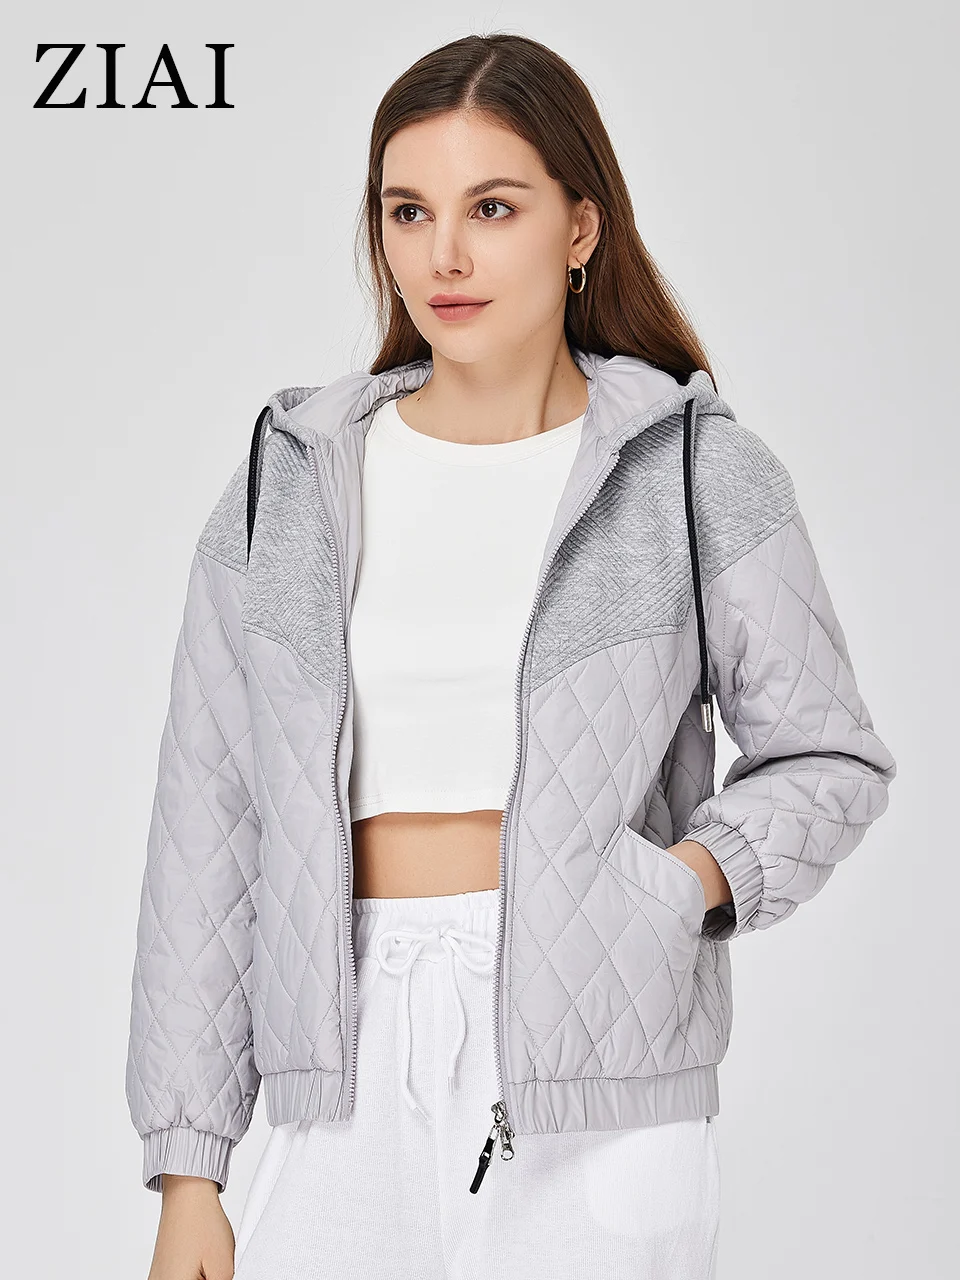 ZIAI New Spring Autumn Short  Women's spring jacket Short Quilted stitching Hooded fashion jackets for women 2023  ZM-20333 enlarge